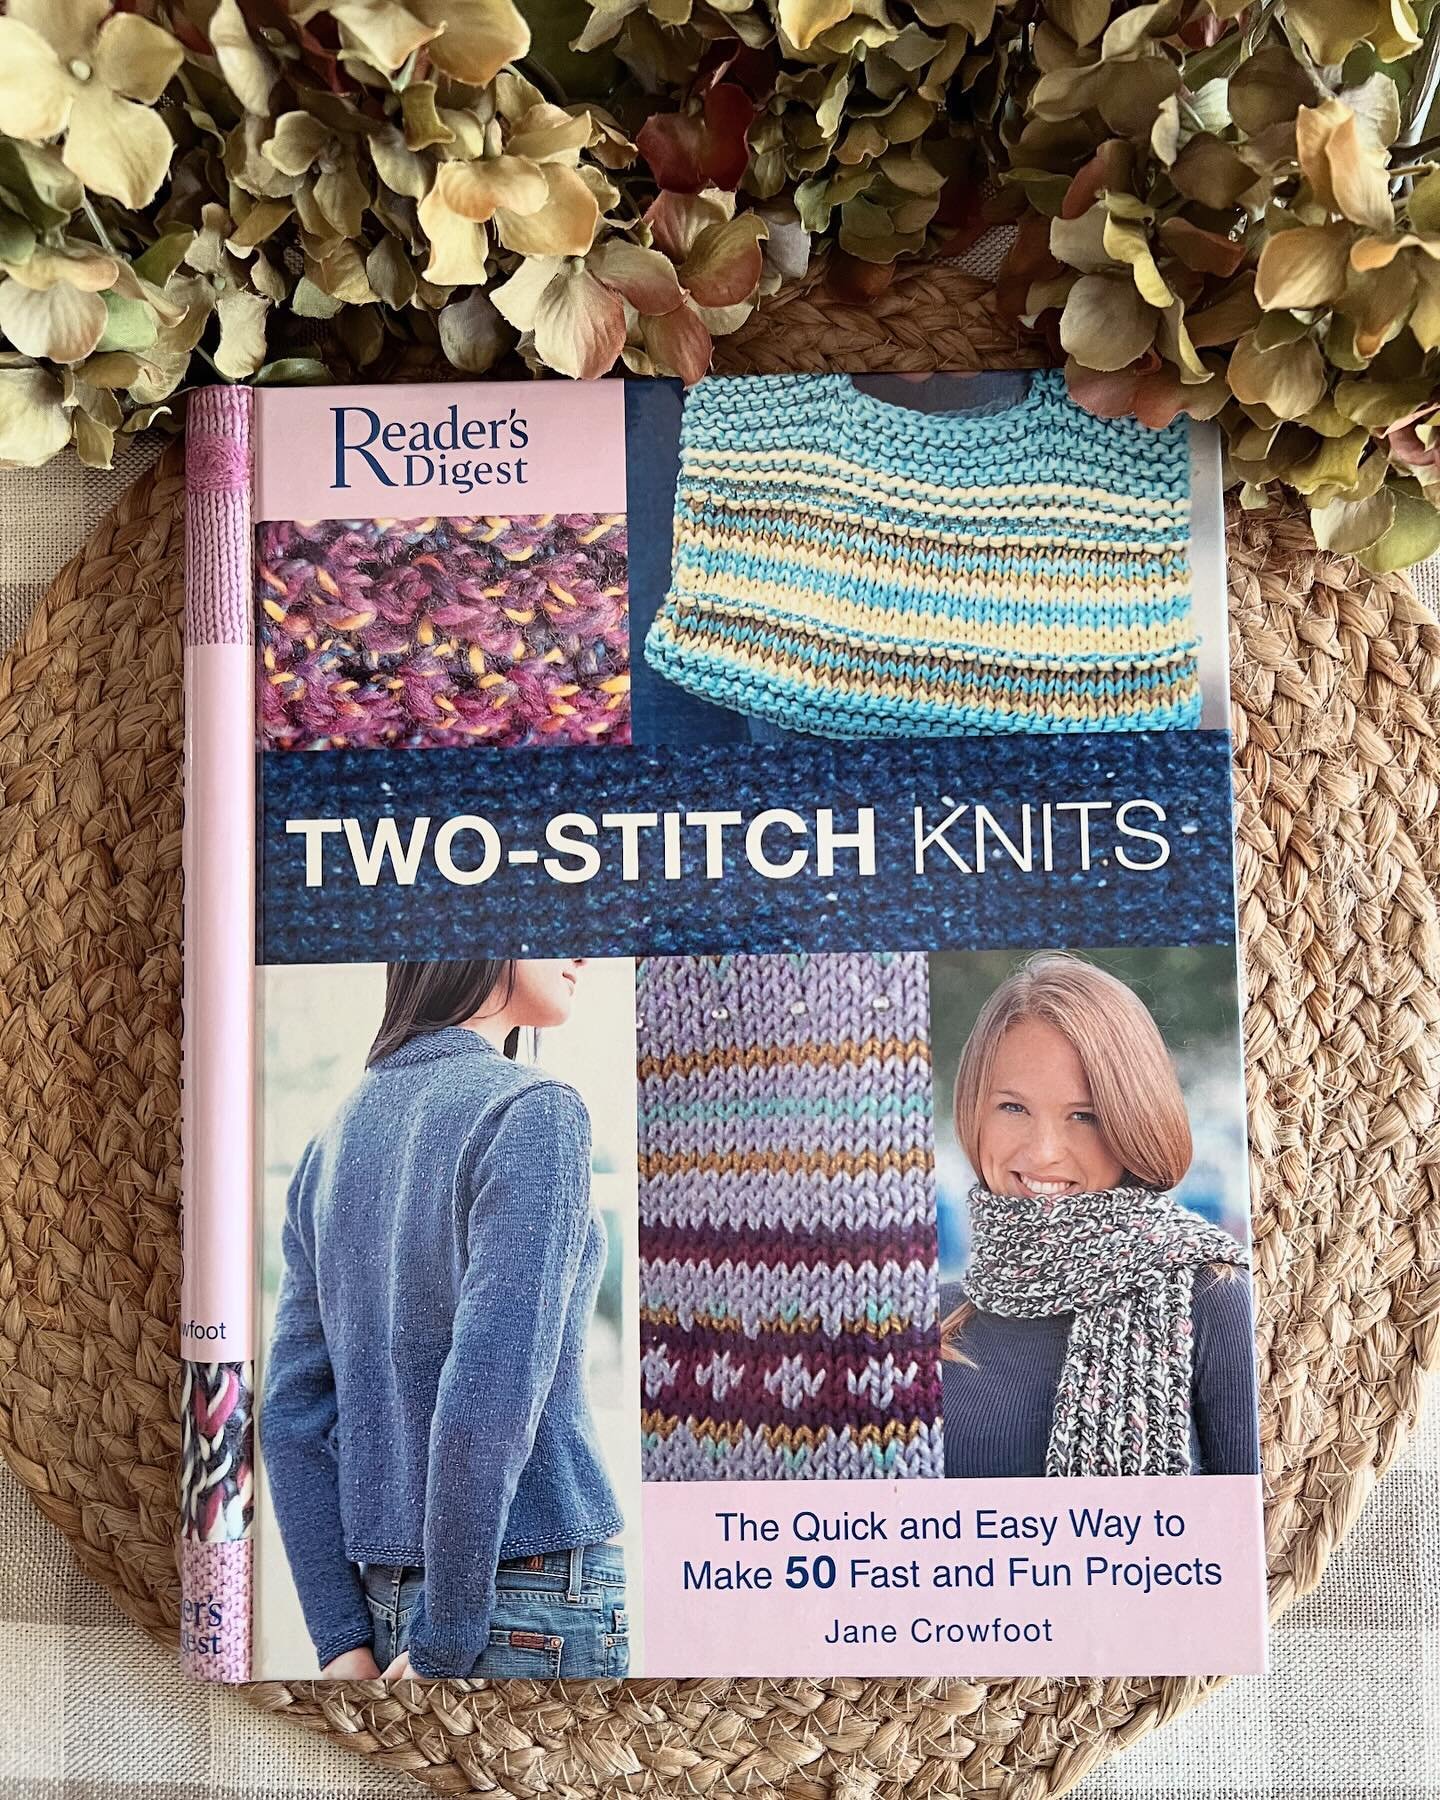 &ldquo;Reader&rsquo;s Digest Two-Stitch Knits&rdquo; by Jane Crowfoot, 2006

Wonderful book full of projects that use just two knitting stitches!

Hardcover, spiral bound. Excellent condition. 
$8 + shipping 
&bull;
&bull;
Please comment me, mine, 🙋